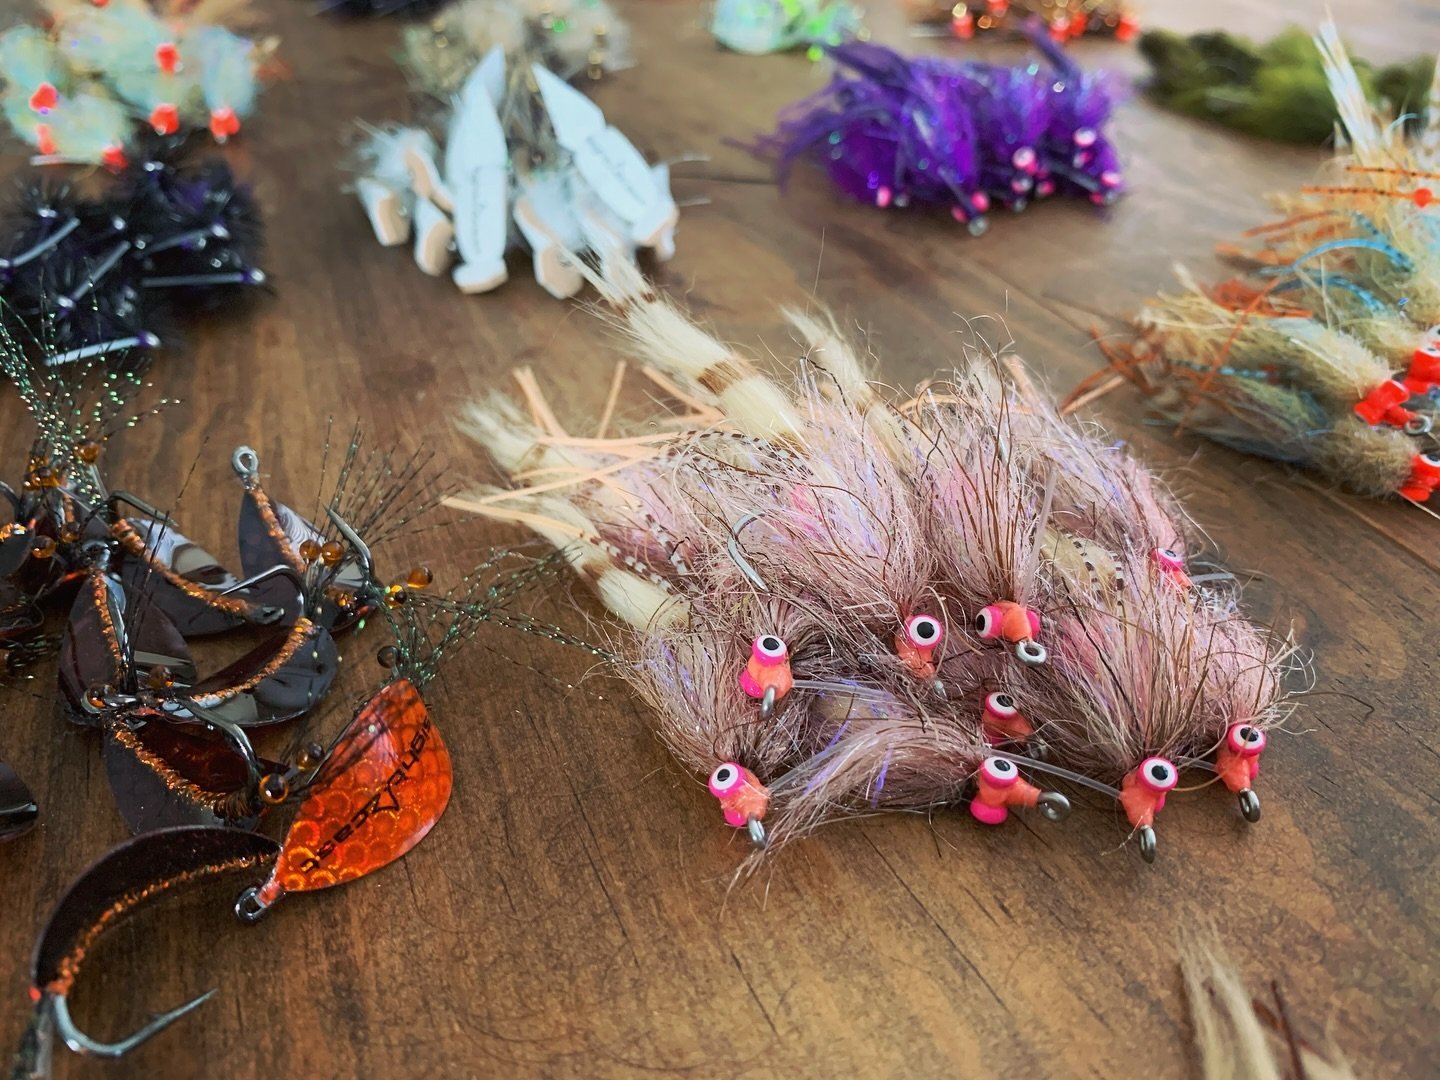 Voted #1 Mother&rsquo;s Day gift, by our Moms!  A handful of shrimp pink Redfish Cracklins. 
Happy Mother&rsquo;s Day to all you Moms out there. 
#happymothersday #sightcast #redfishcrack
#redfishflies #saltwaterflies #redfishcracklin #saltwaterflyfi